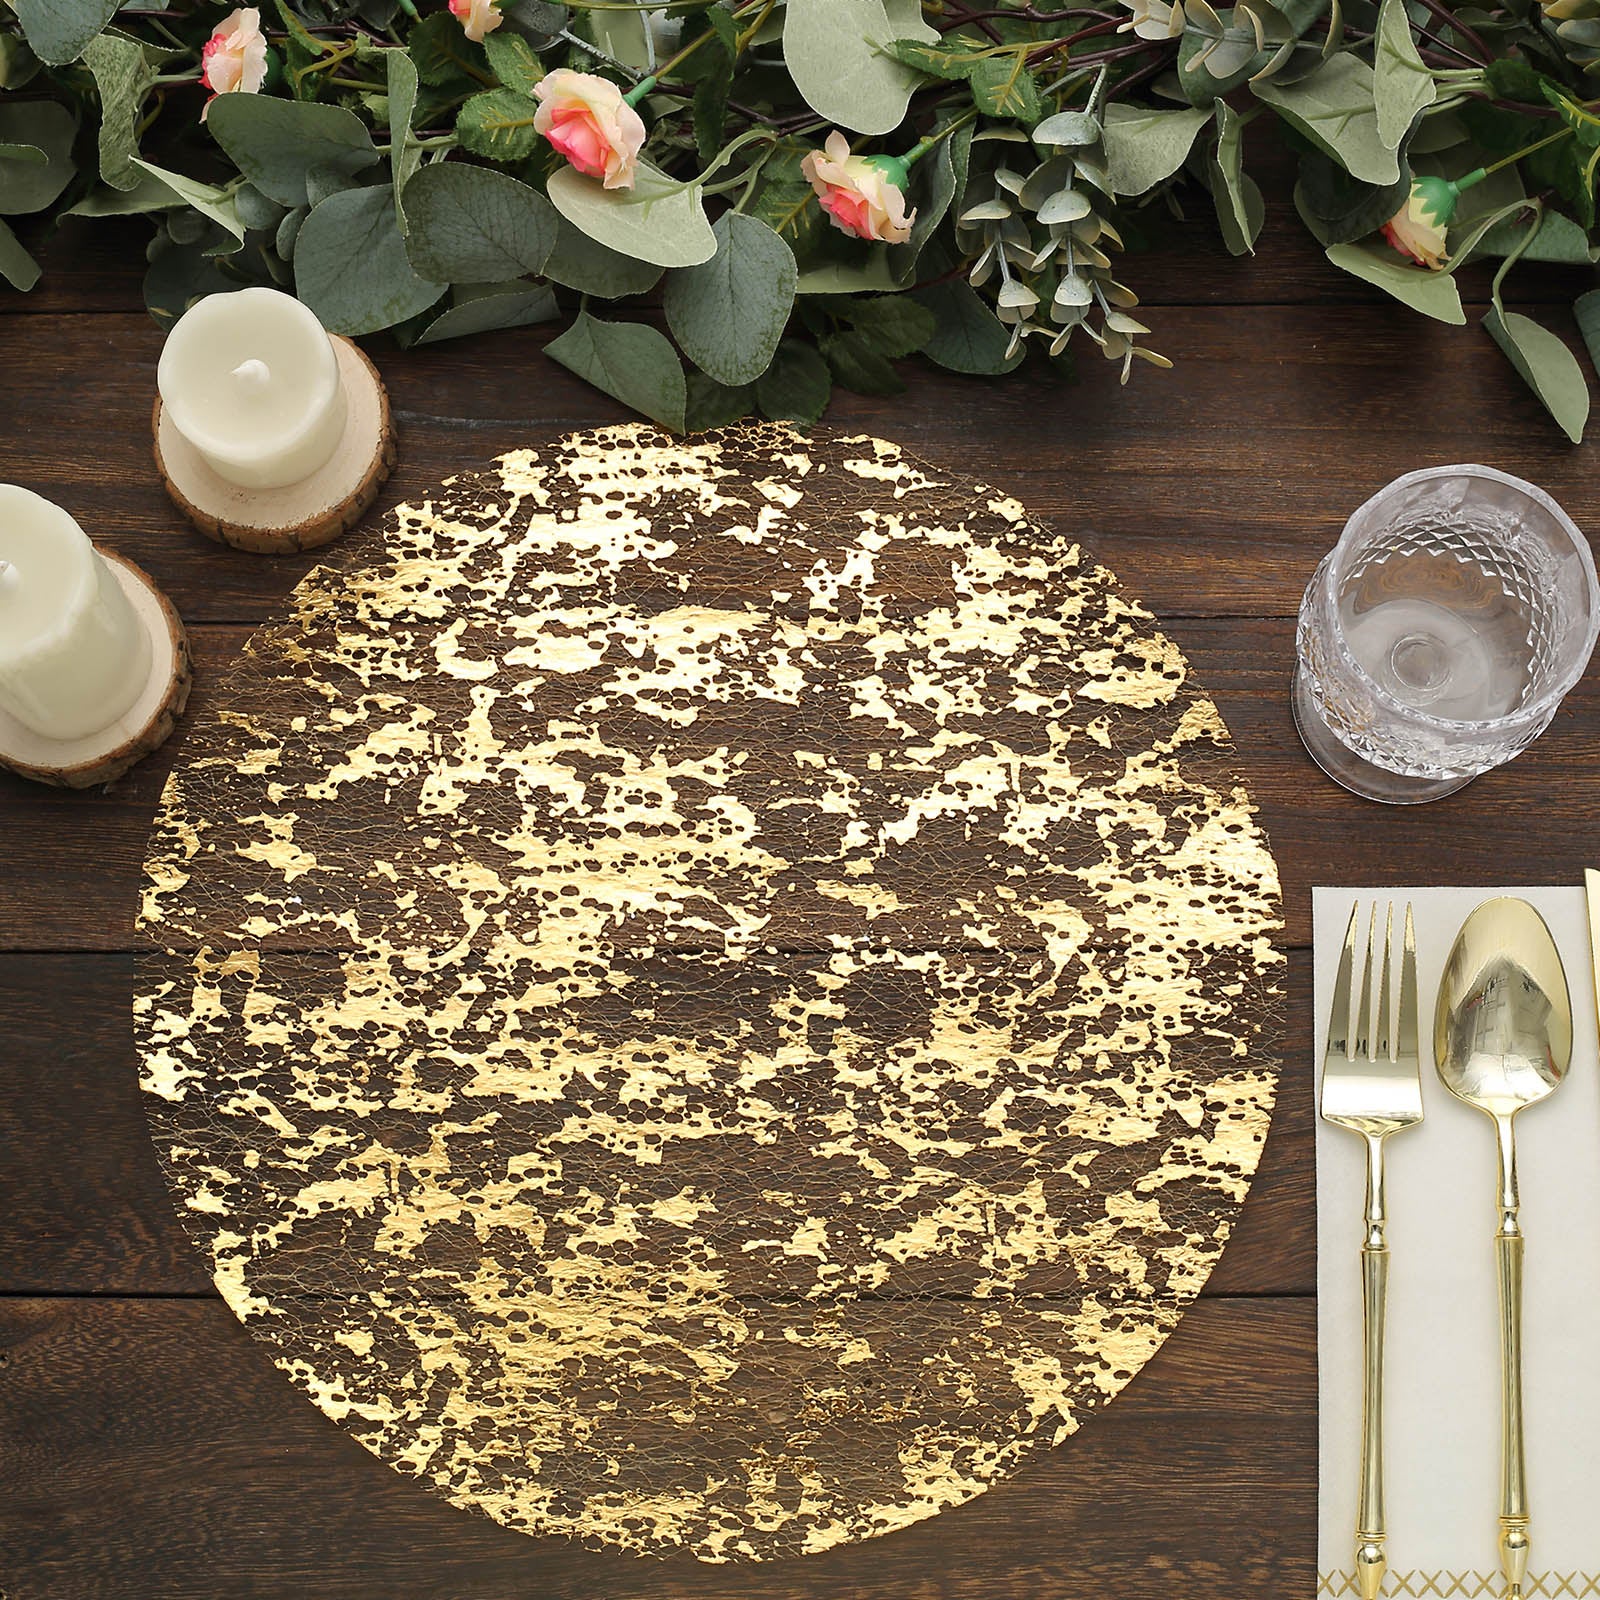 10 Pack | 13 Metallic Gold Foil Mesh Table Placemats, Disposable Round Shiny Dining Mats | by Tableclothsfactory